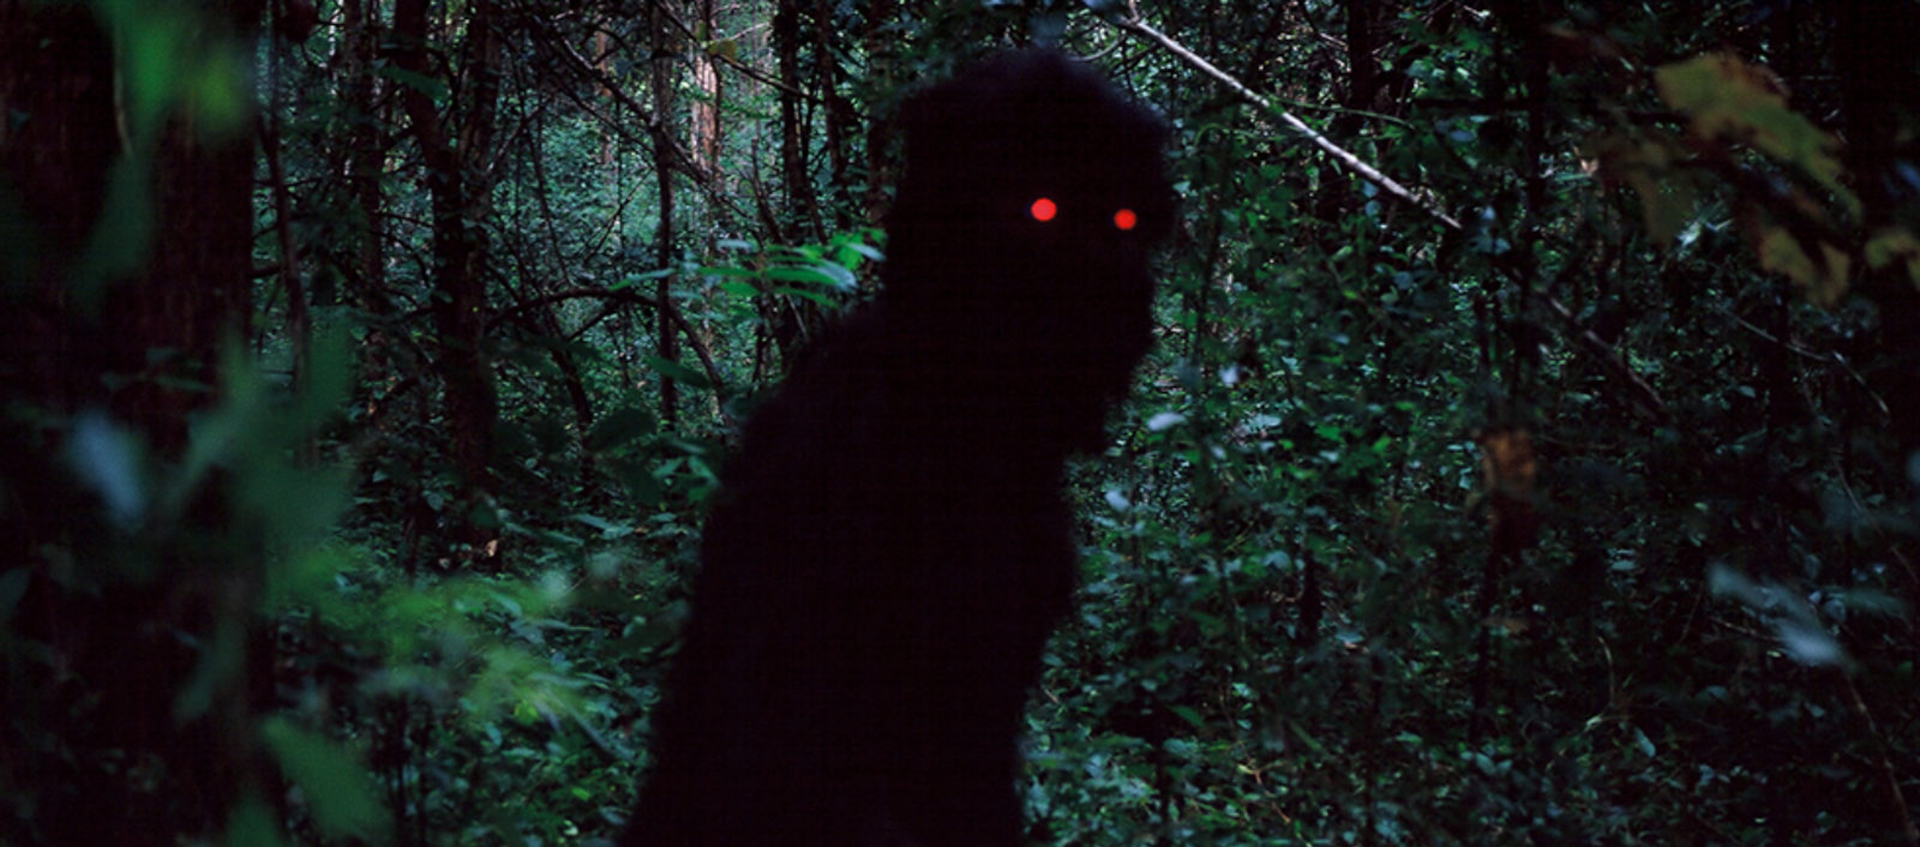 A mysterious shadowy figure with bright red eyes looks out at the viewer from within a dense, dark jungle.